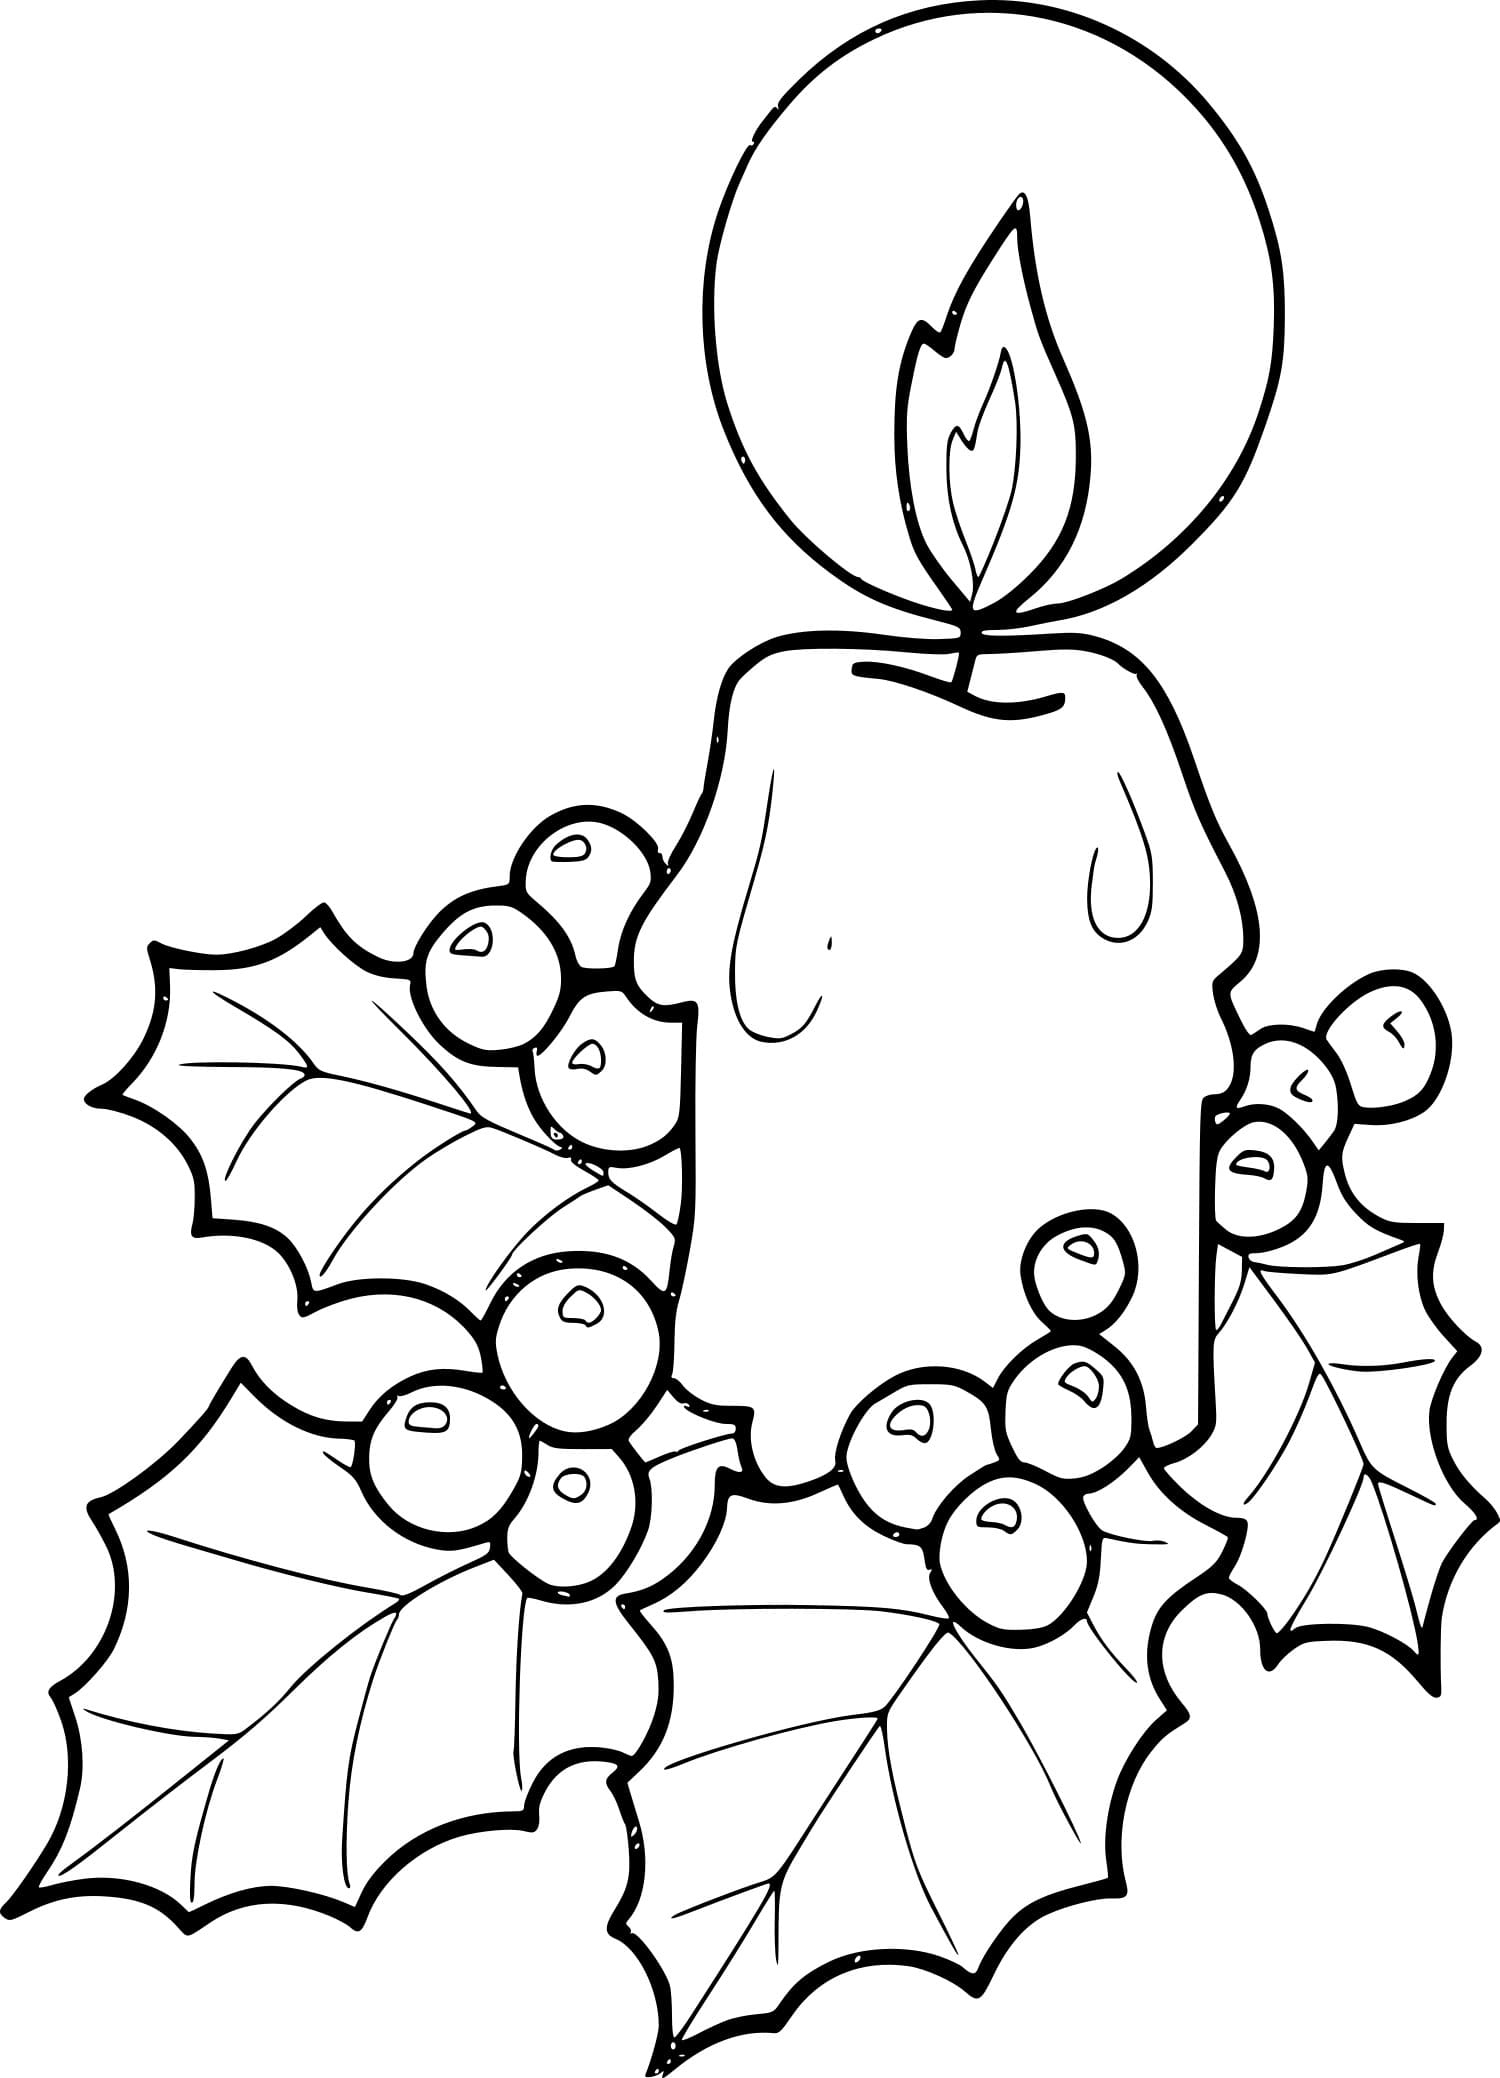 Burning Candle Coloring Page